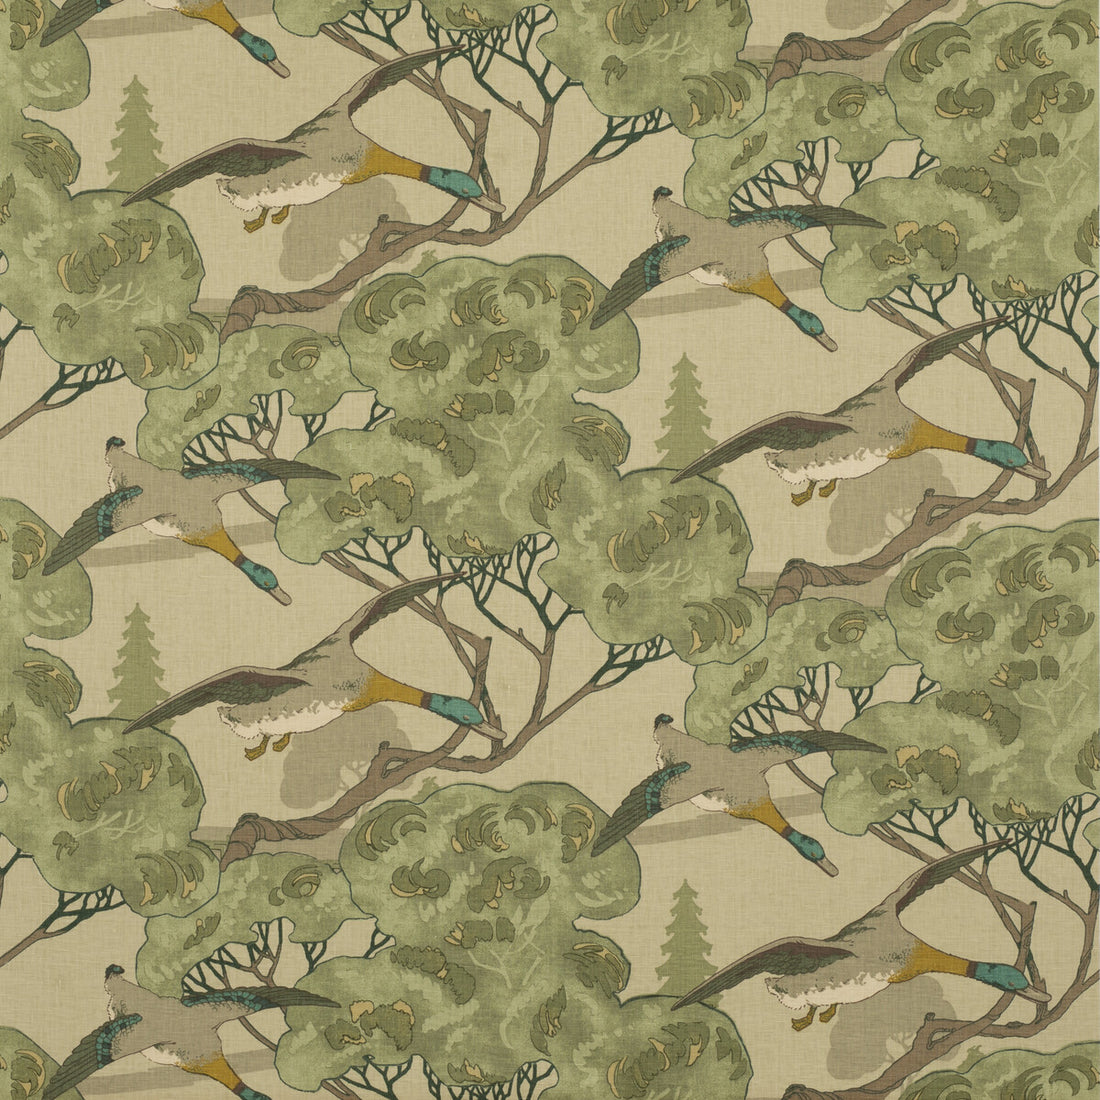 Flying Ducks fabric in emerald color - pattern FD205.S16.0 - by Mulberry in the Icons Fabrics collection